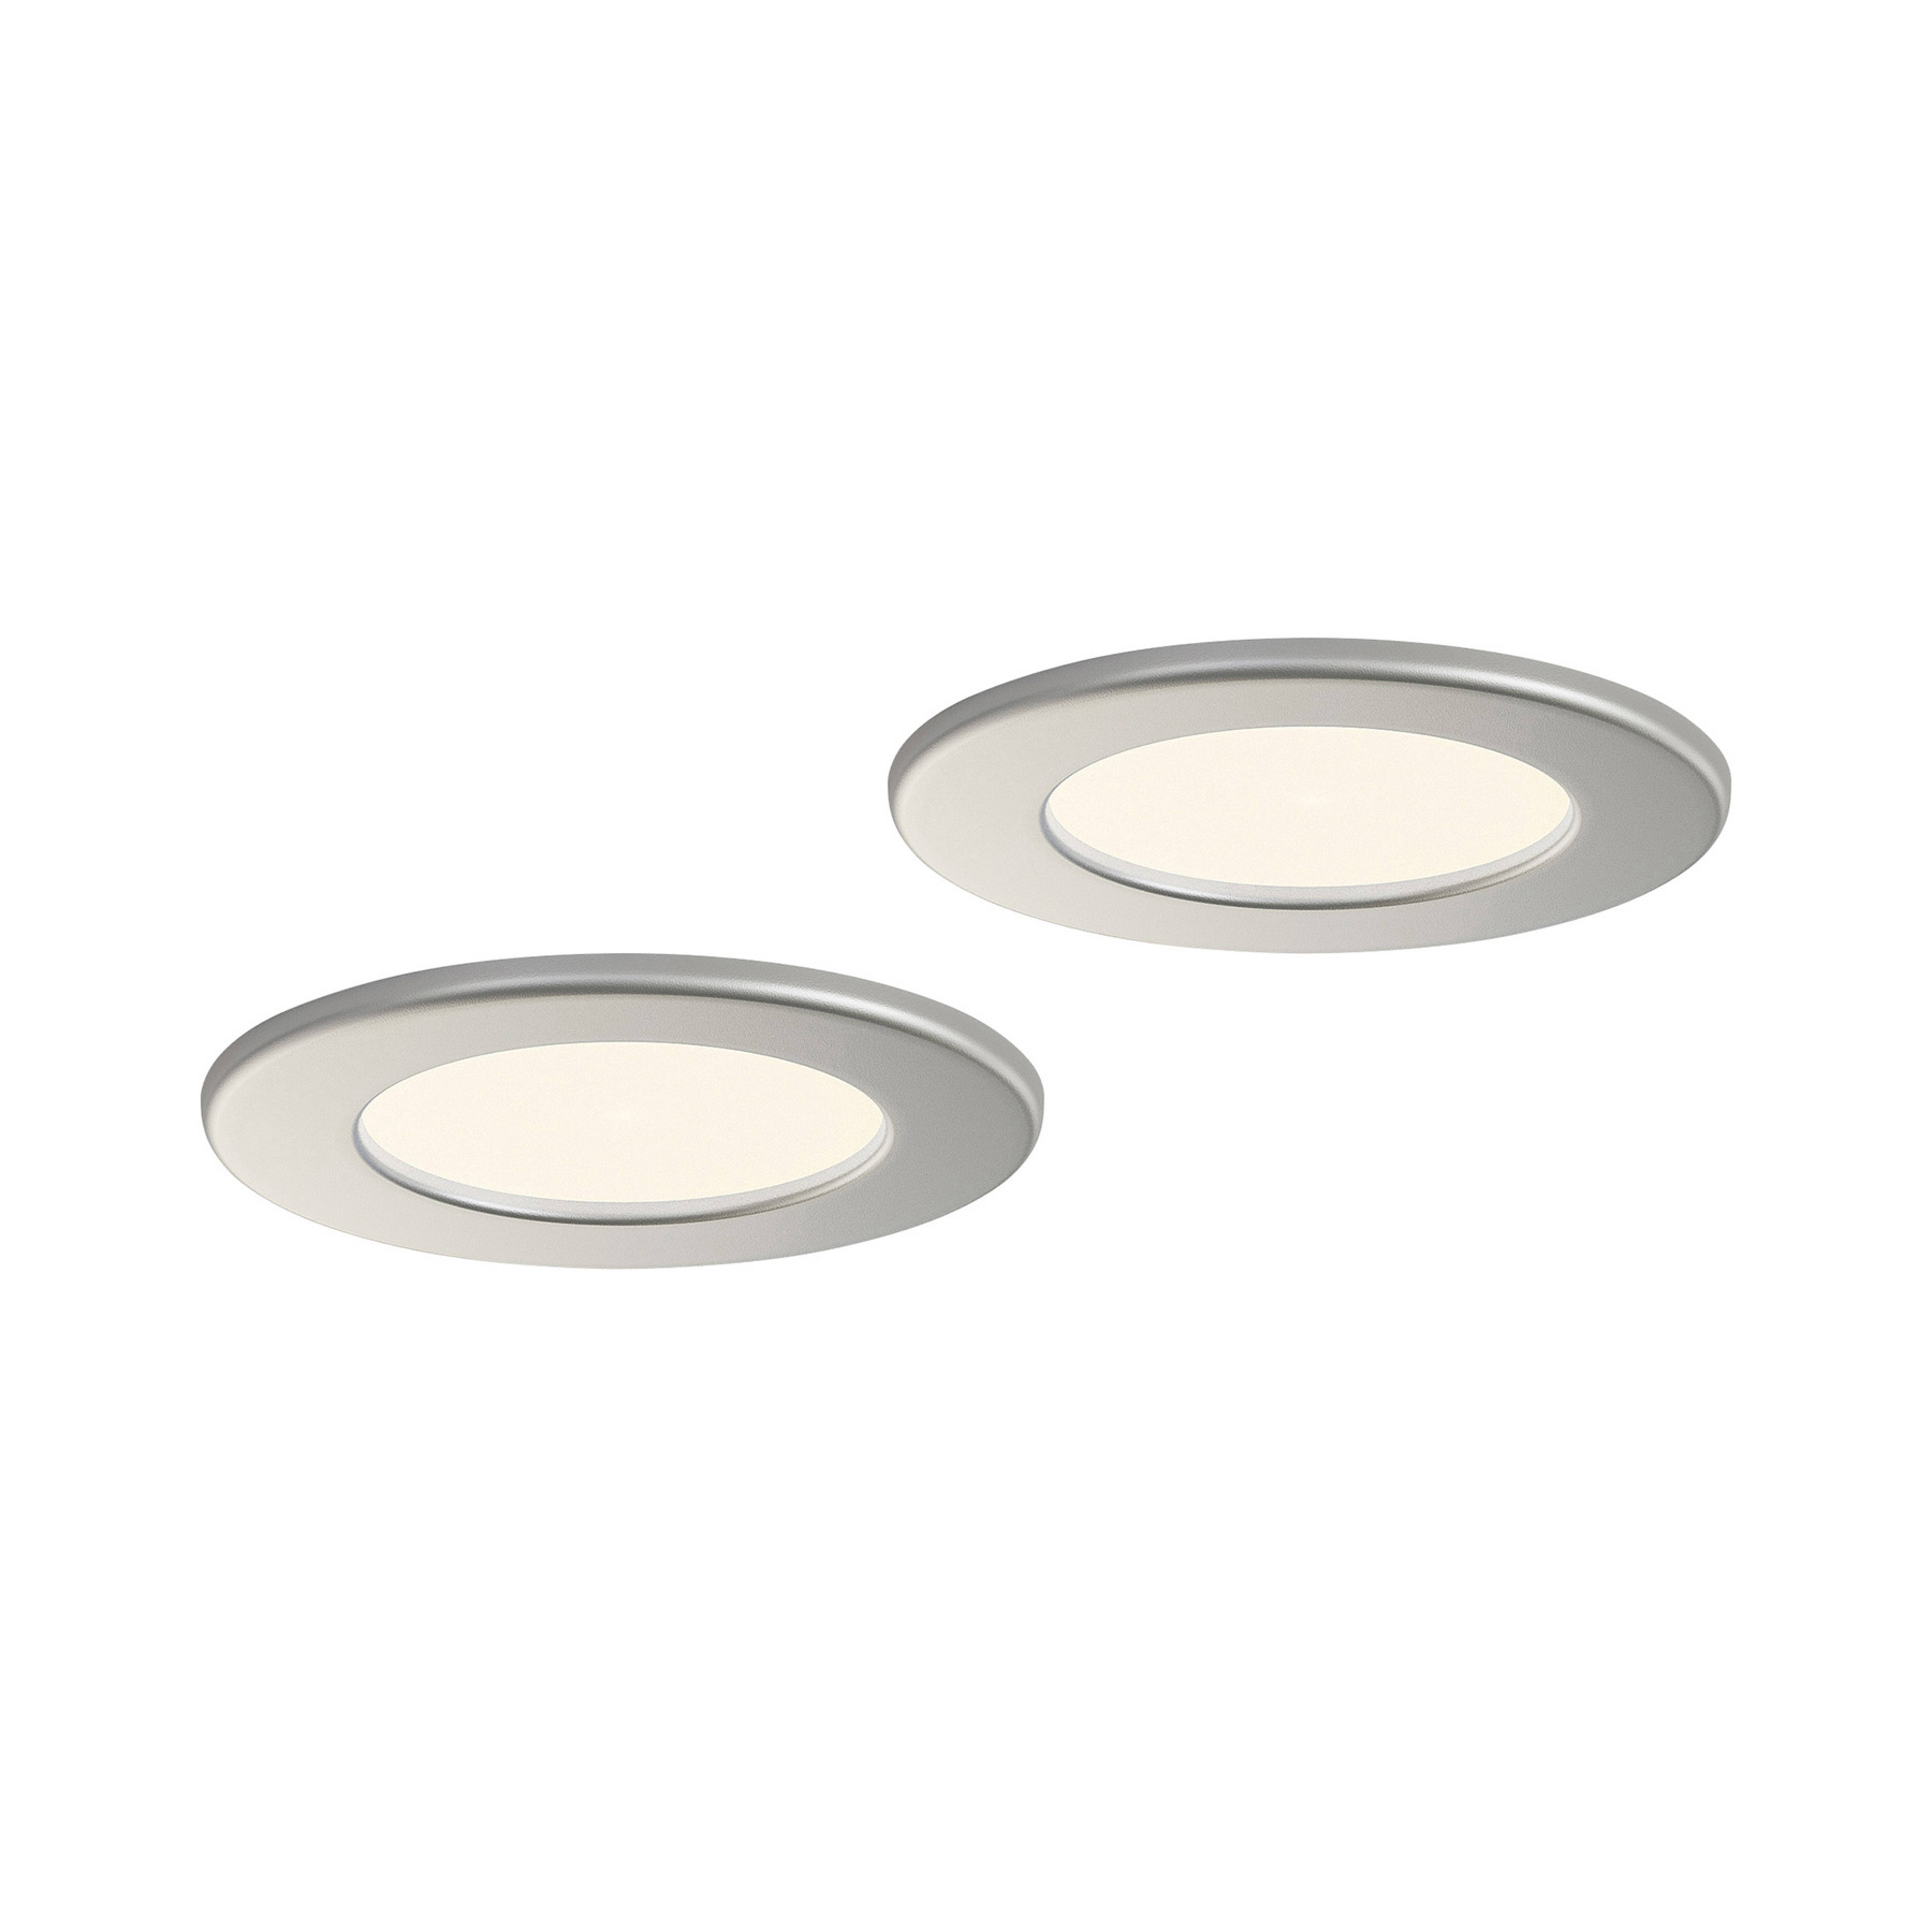 Prios LED recessed light Cadance, silver, 11.5cm, 2pcs, dimmable